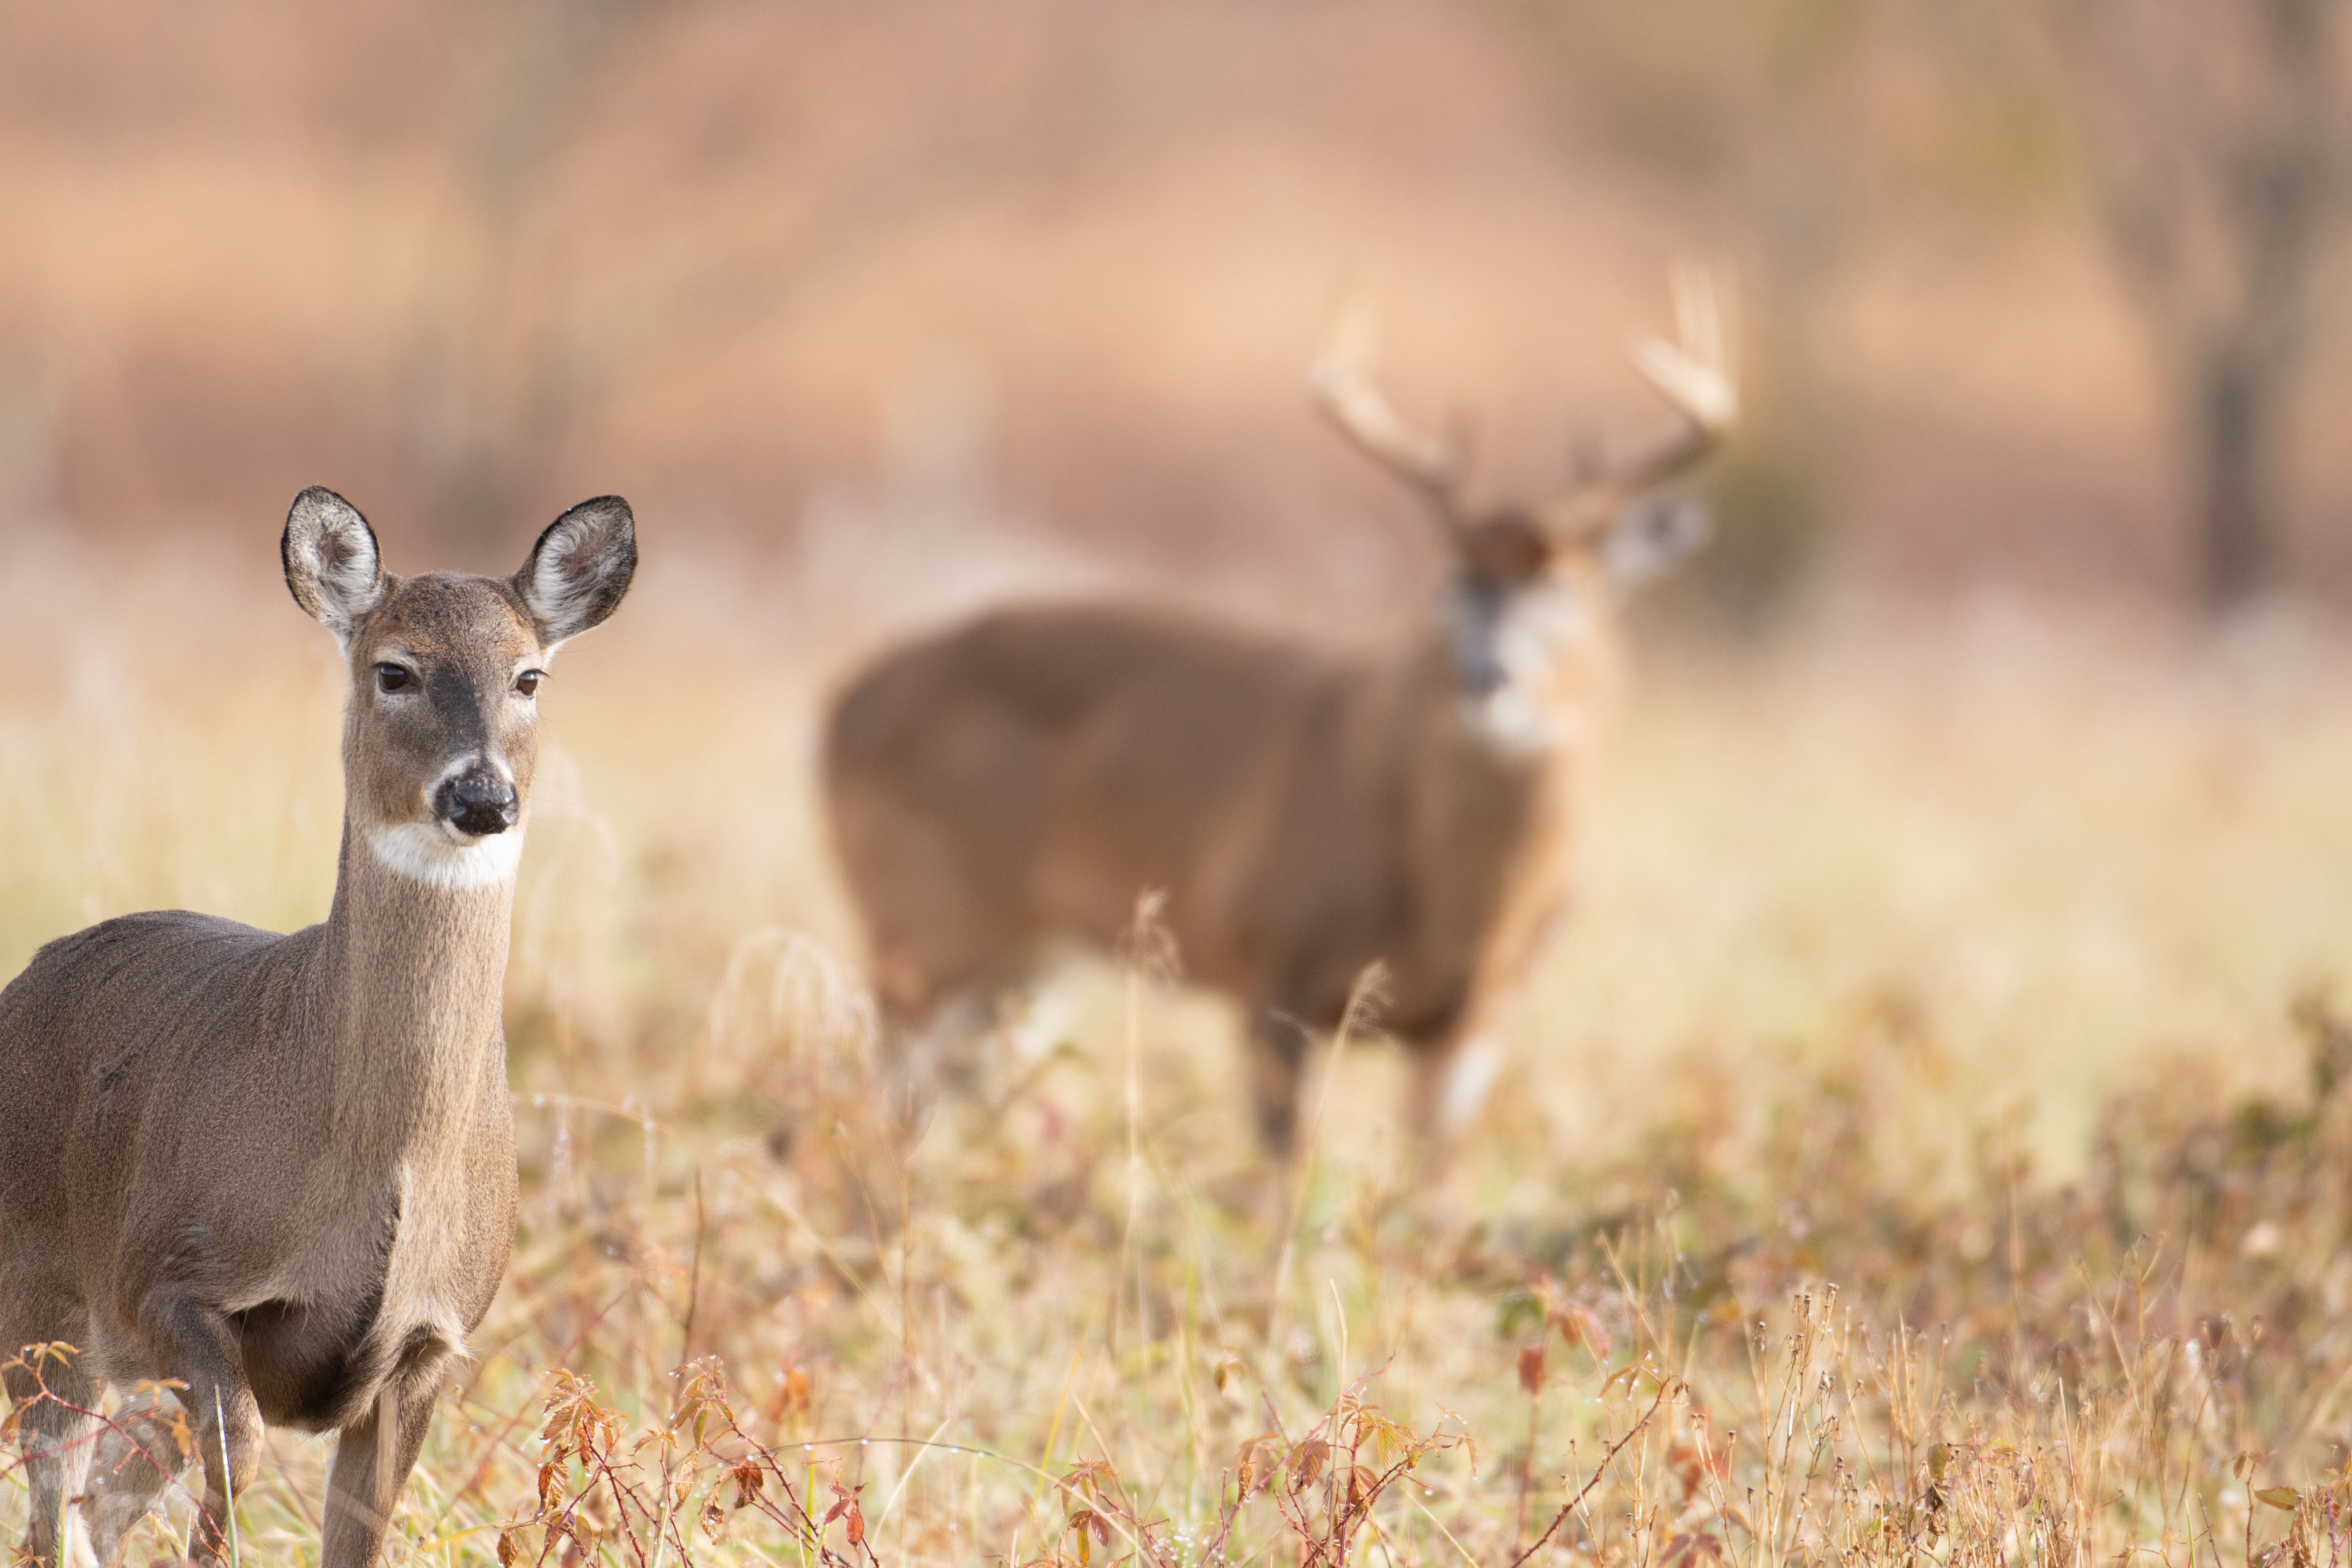 A doe in the foreground with a blurry buck in the background, whitetail facts concept. 